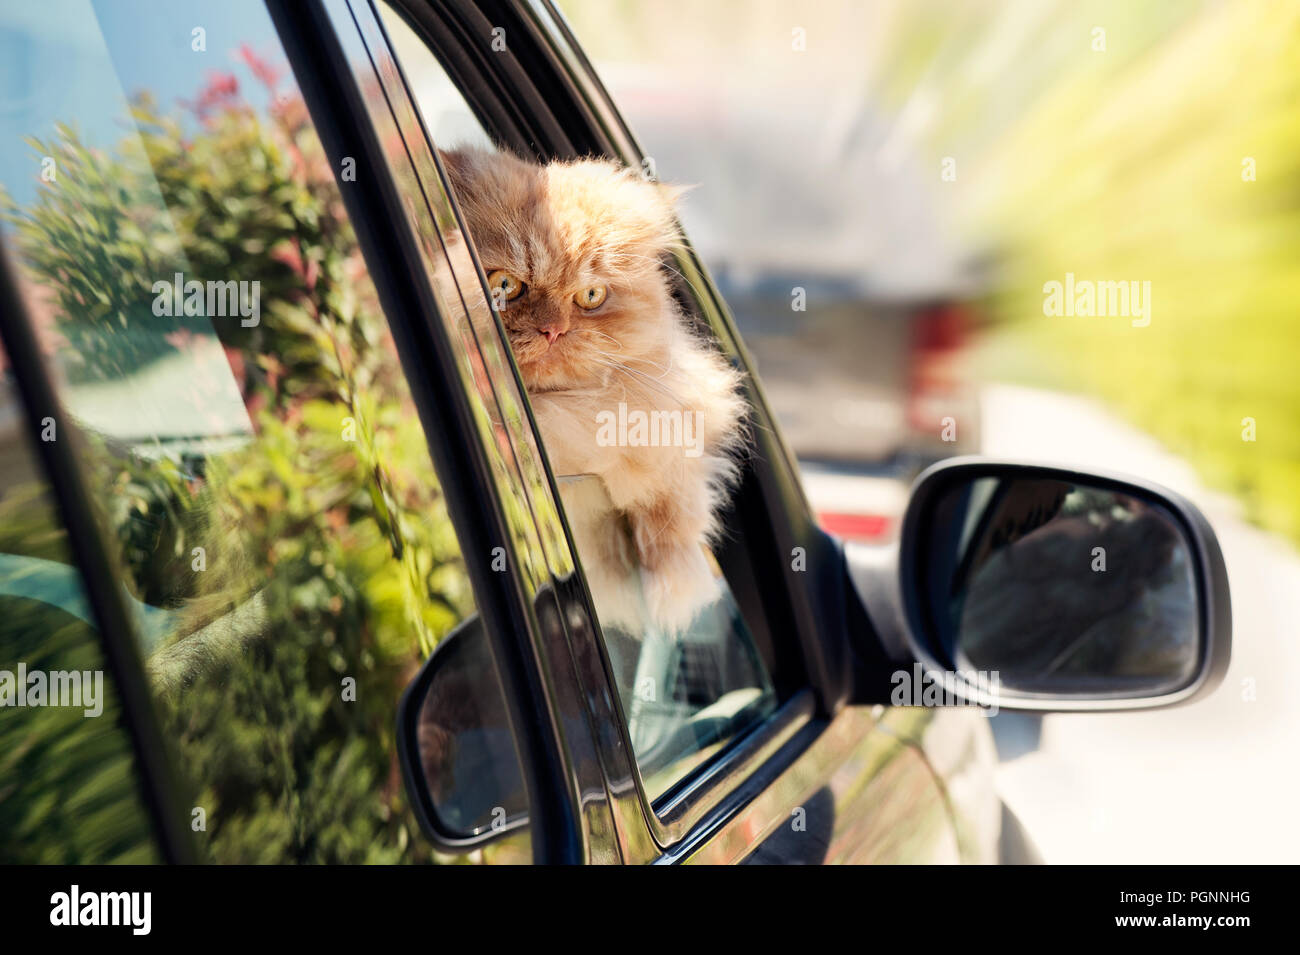 Persian cat looking out of car window Stock Photo